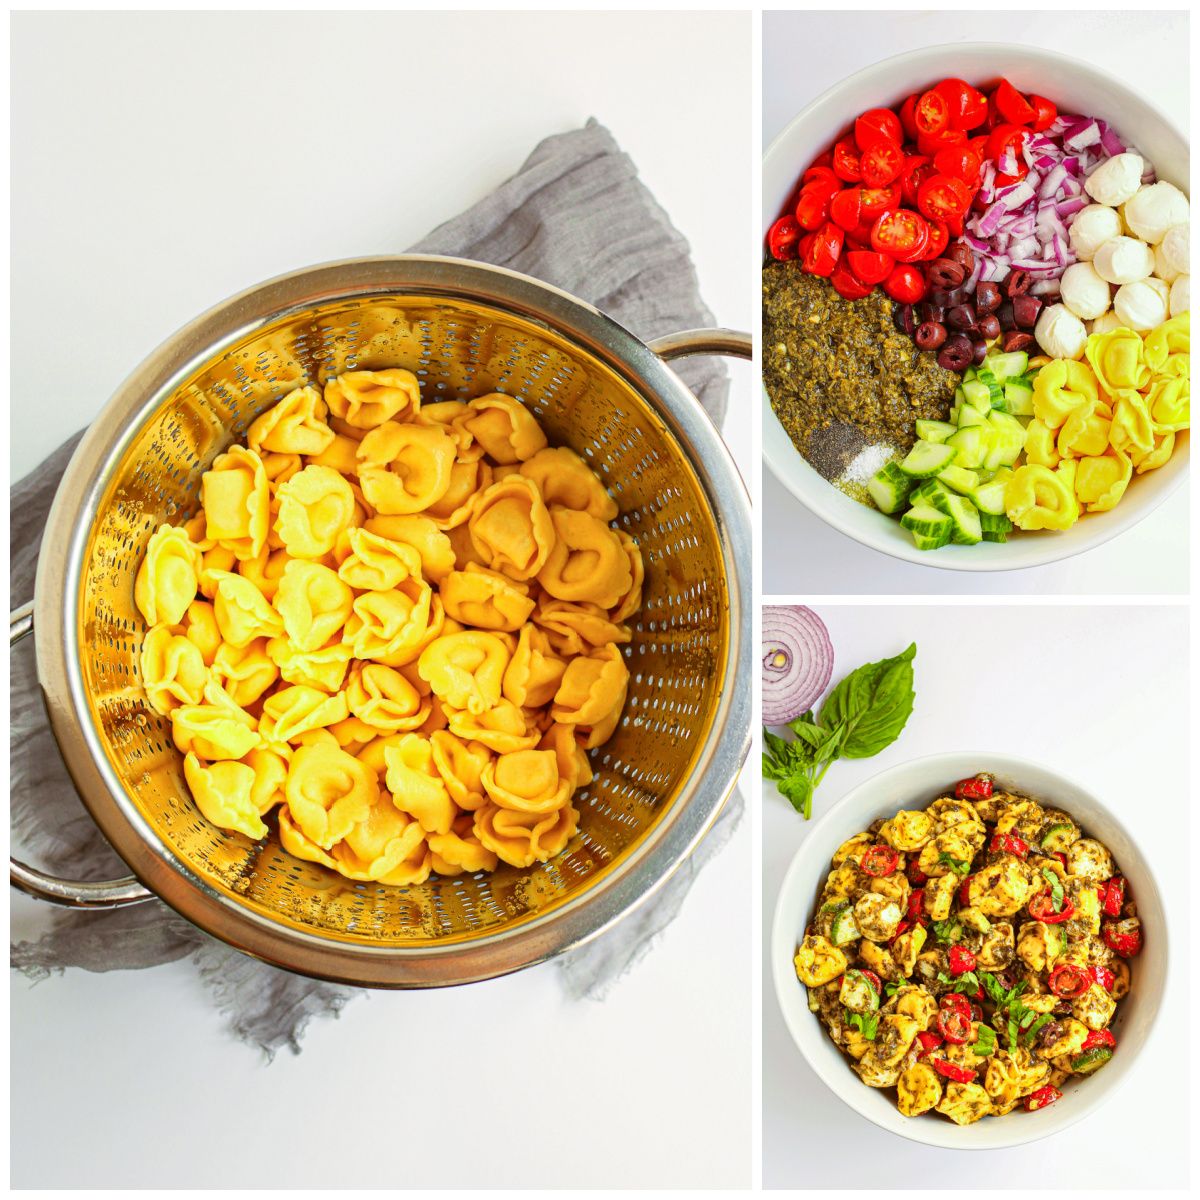 Step by step photos on how to make a Tortellini Pasta Salad.